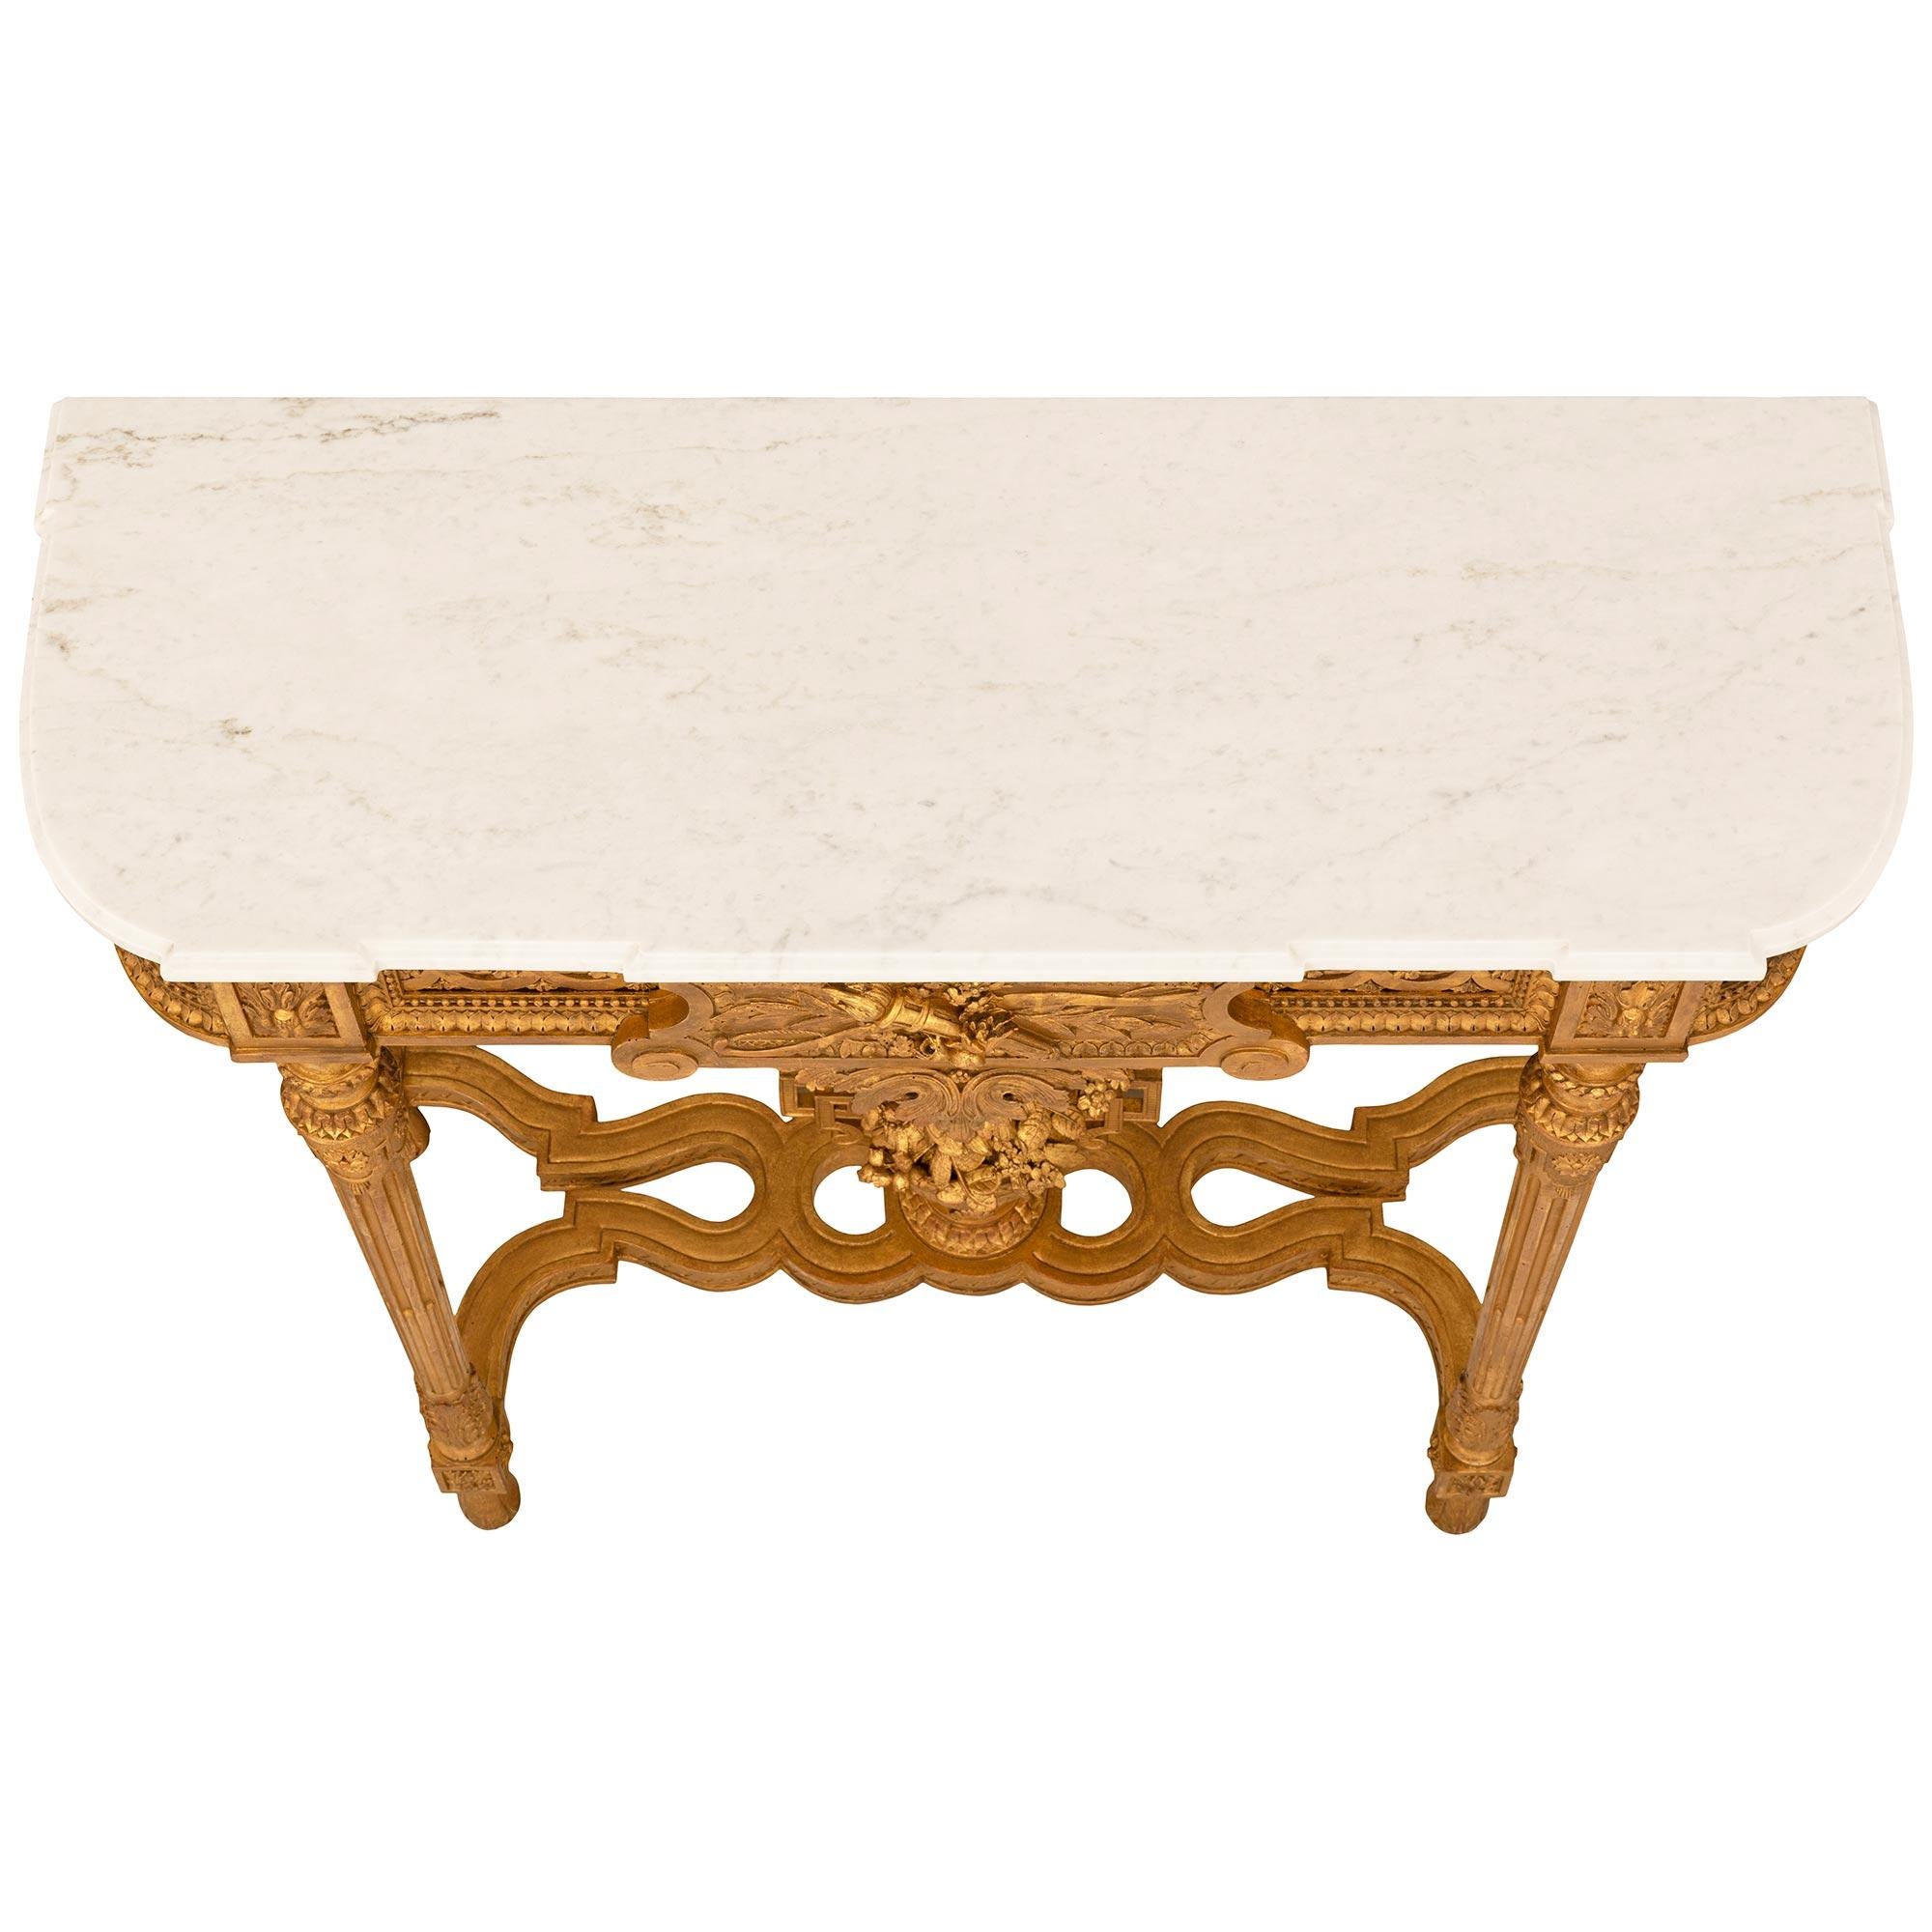 An exquisitely detailed French 19th century Louis XVI st. white Carrara marble and Giltwood console. The 